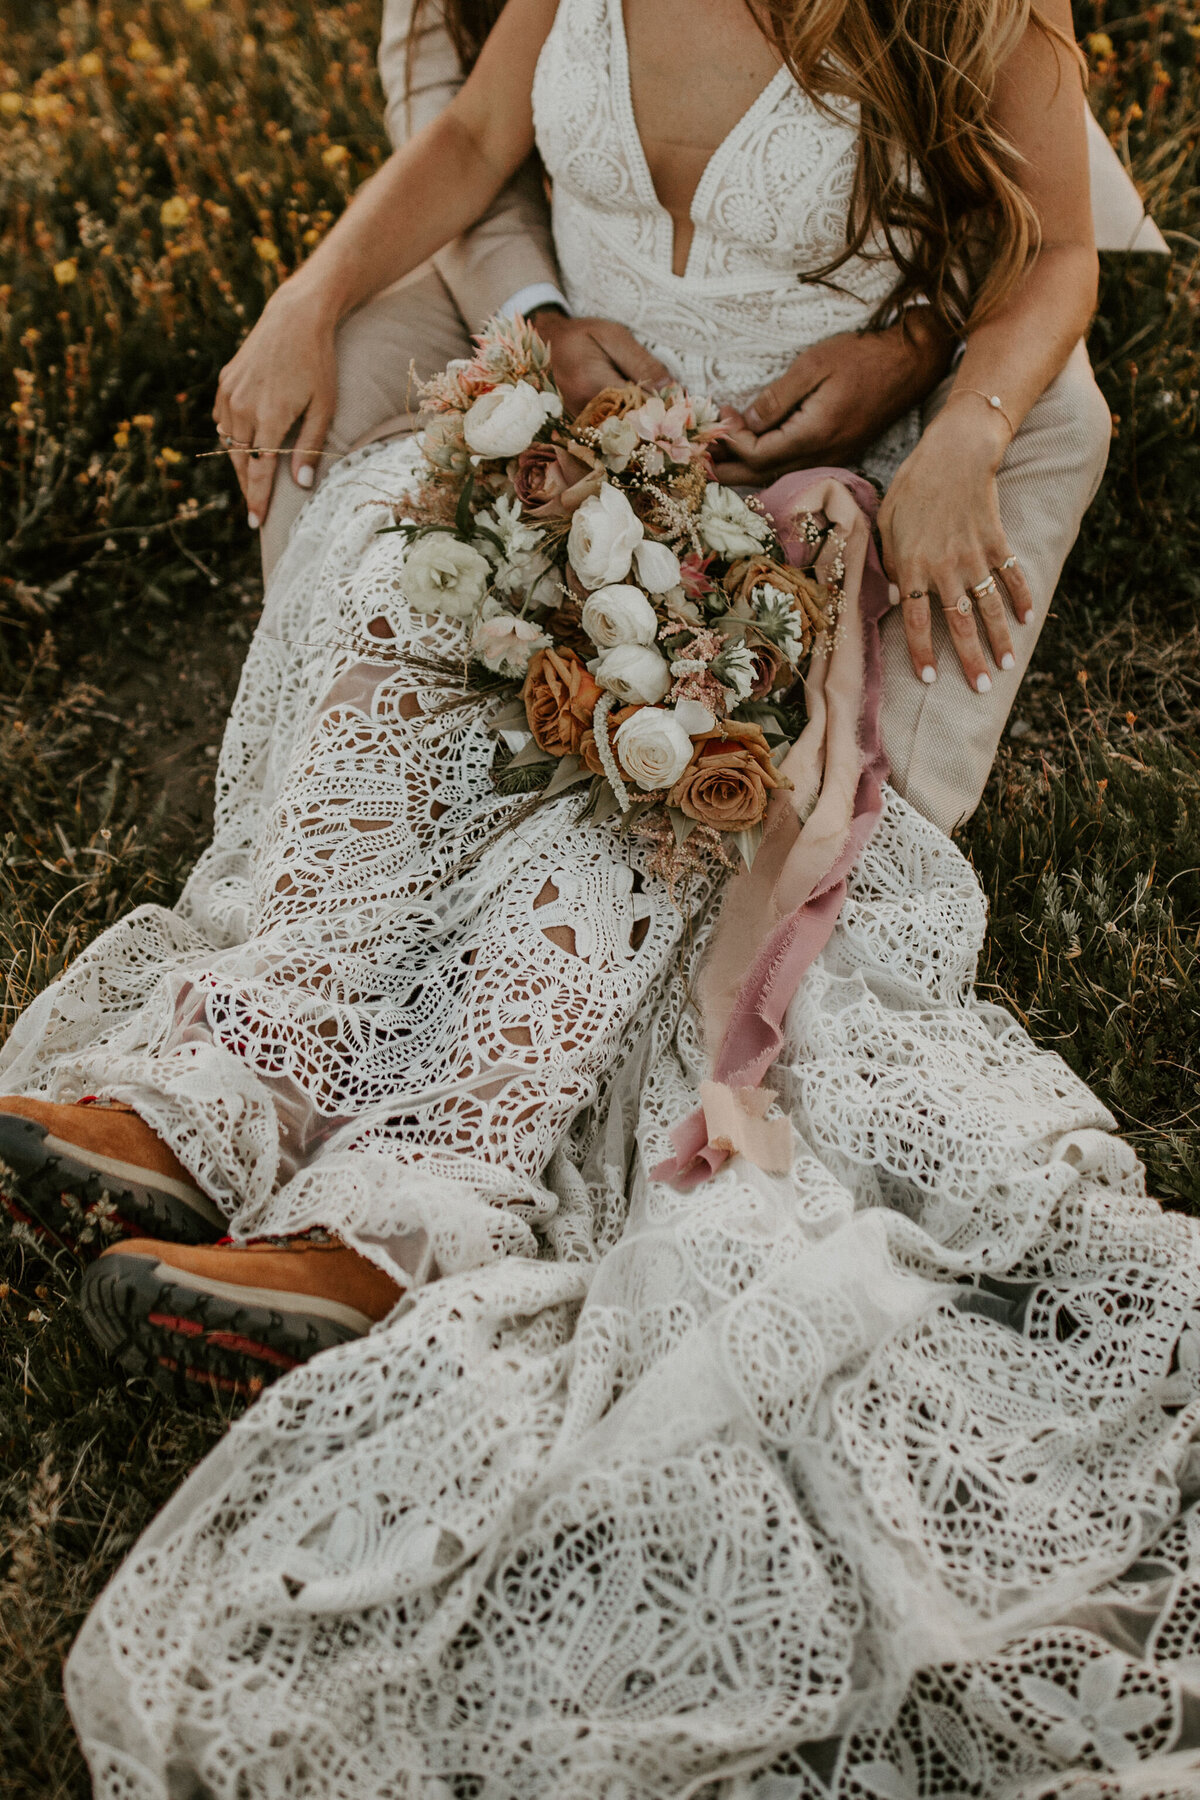 bride is hugged by groom while wearing a white wedding gown and hiking boots, holding a bouquet sitting on grass